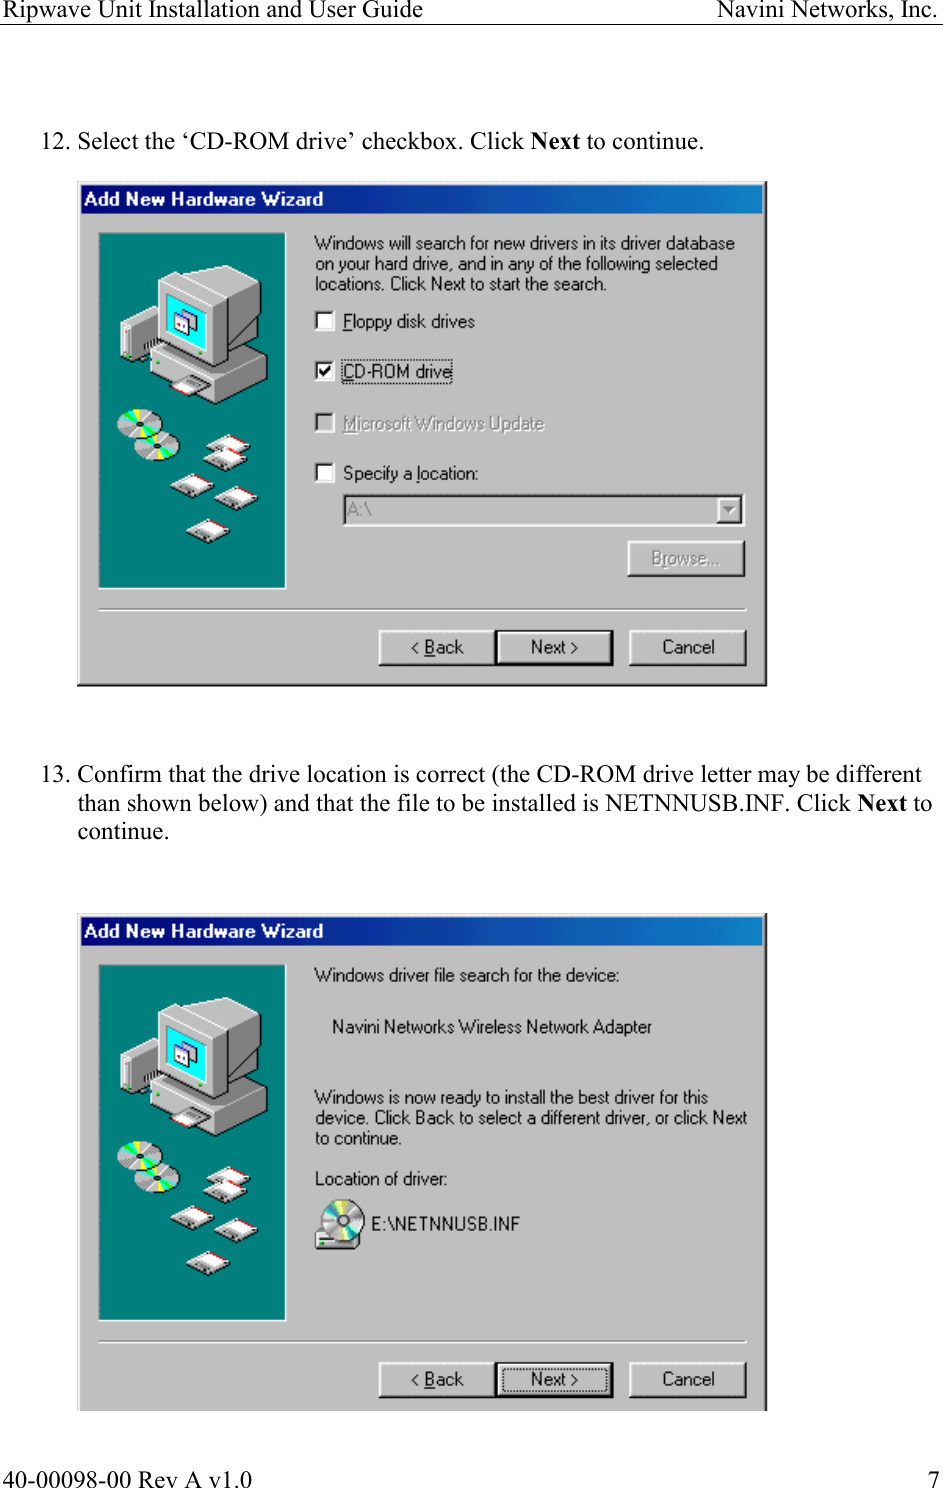 Ripwave Unit Installation and User Guide                                               Navini Networks, Inc.   12. Select the ‘CD-ROM drive’ checkbox. Click Next to continue.                      13. Confirm that the drive location is correct (the CD-ROM drive letter may be different than shown below) and that the file to be installed is NETNNUSB.INF. Click Next to continue.                      40-00098-00 Rev A v1.0  7